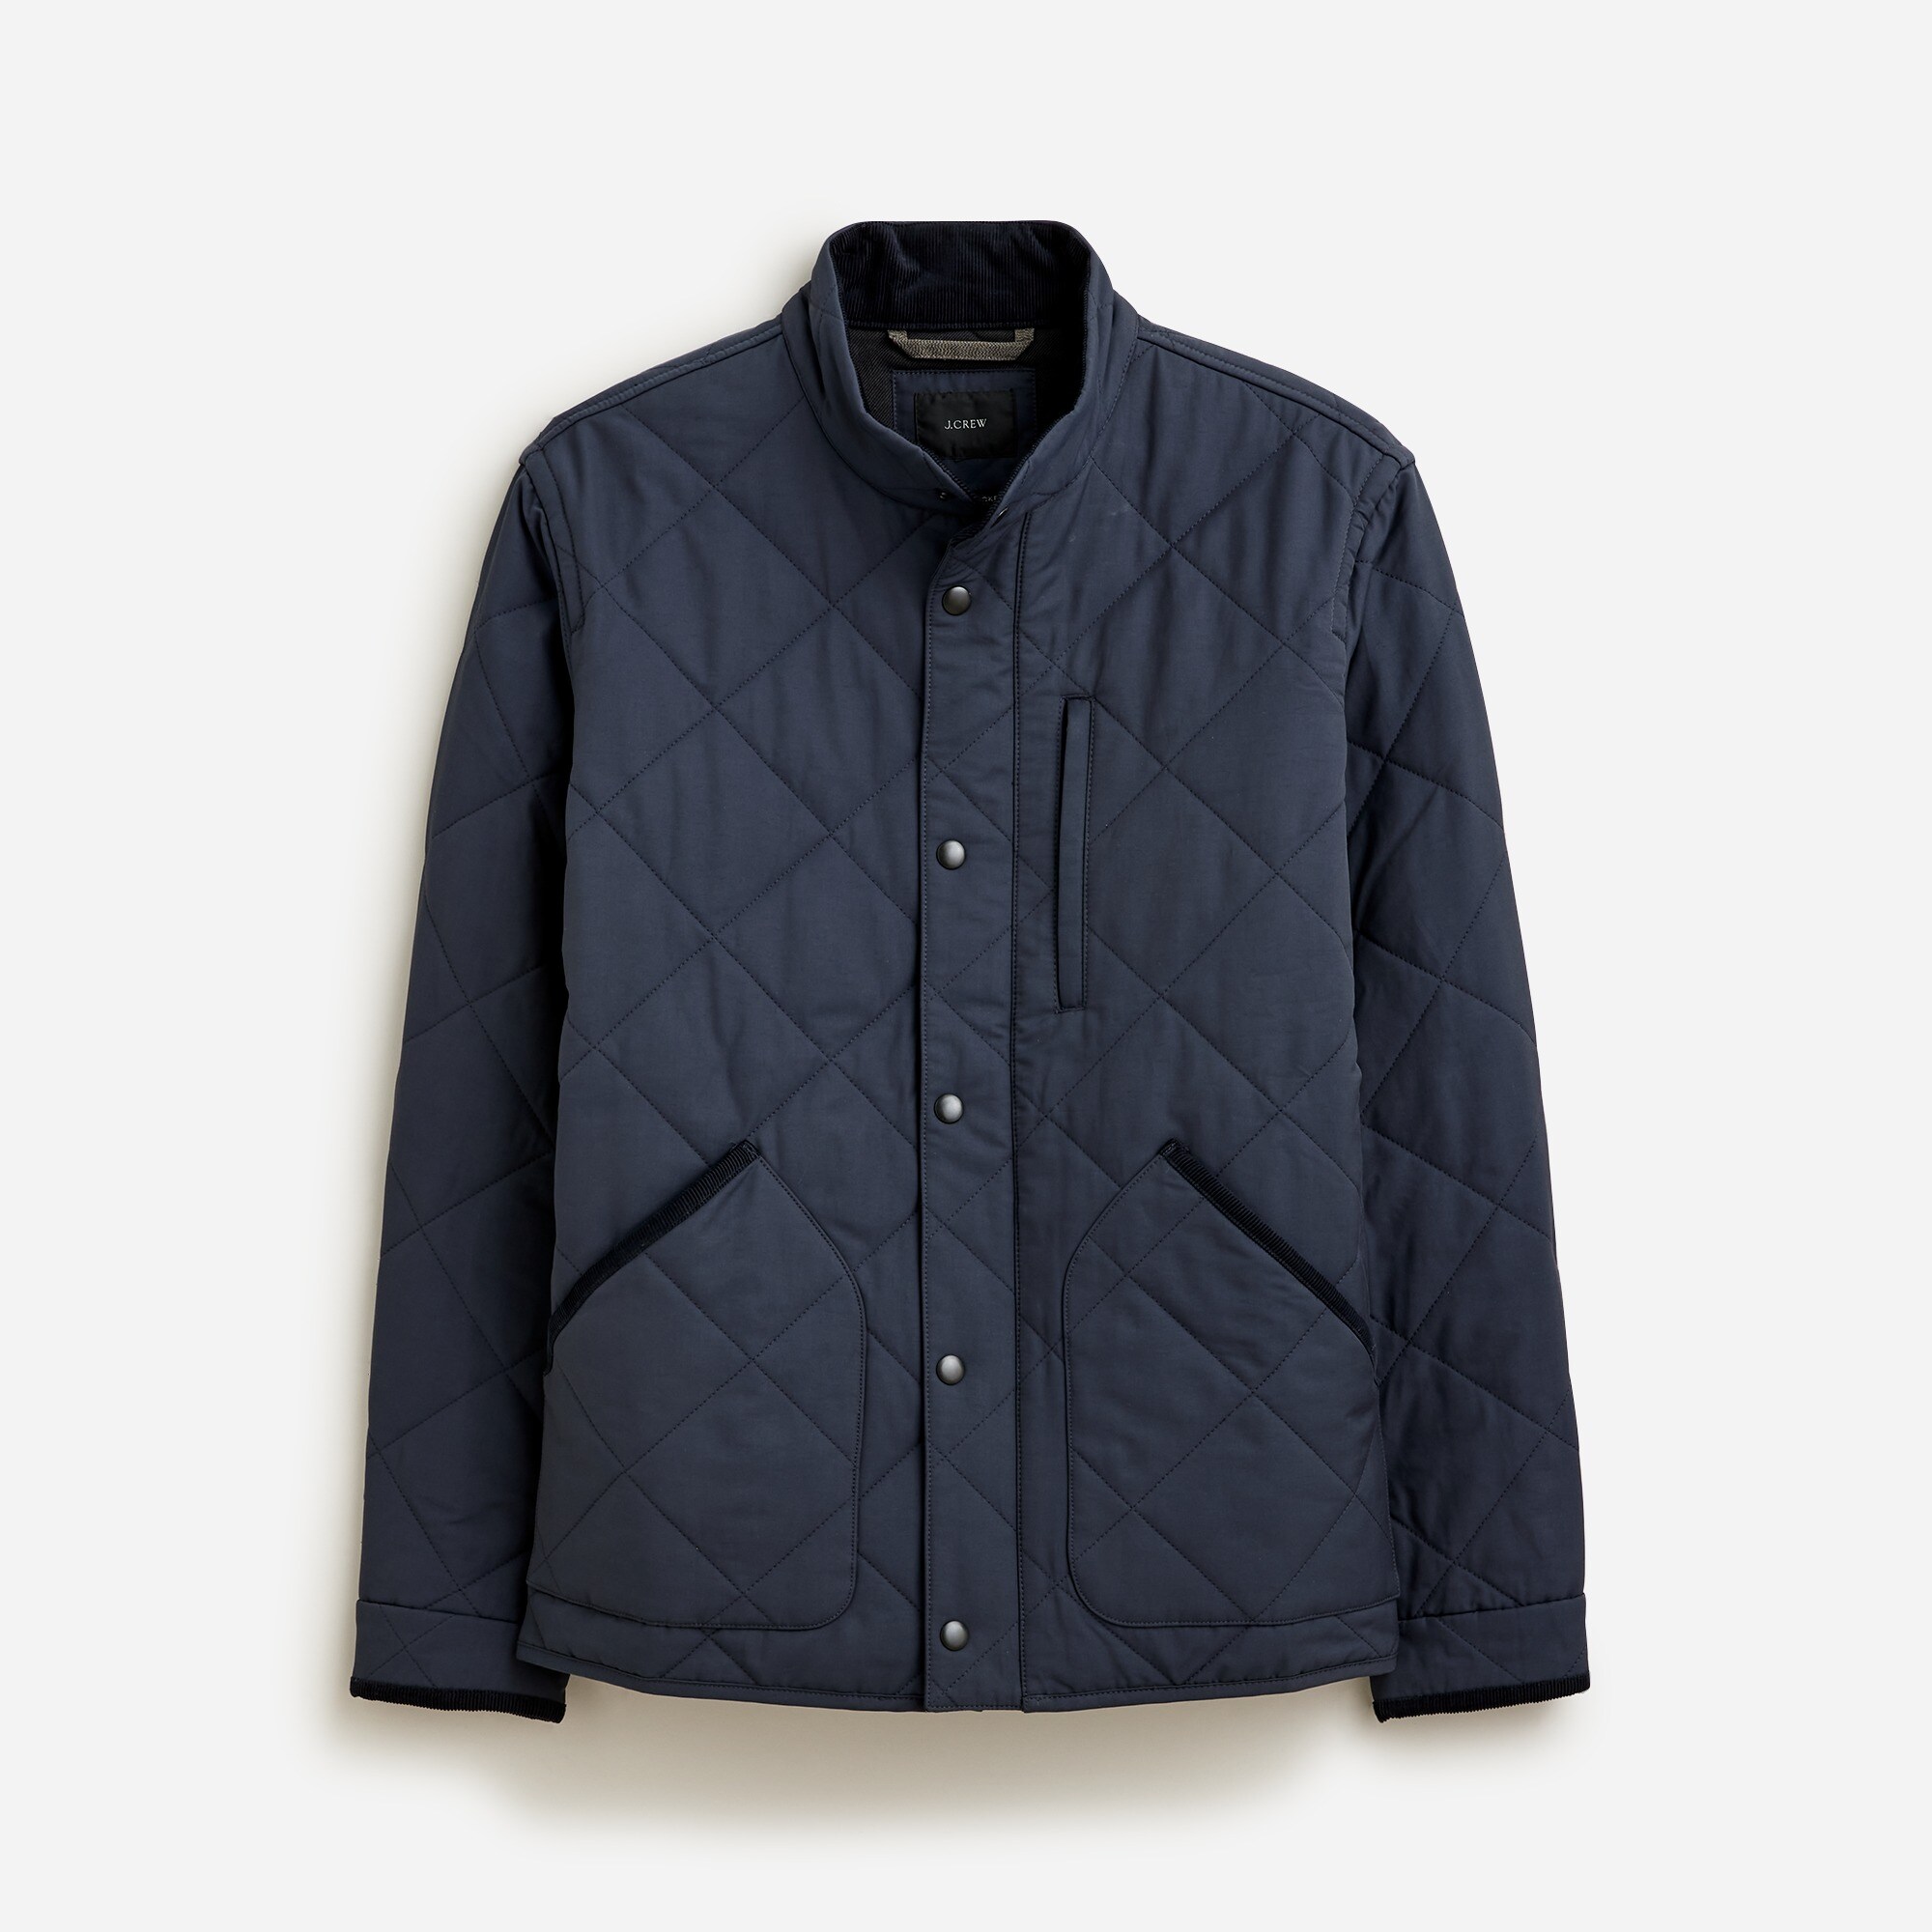  Sussex quilted jacket